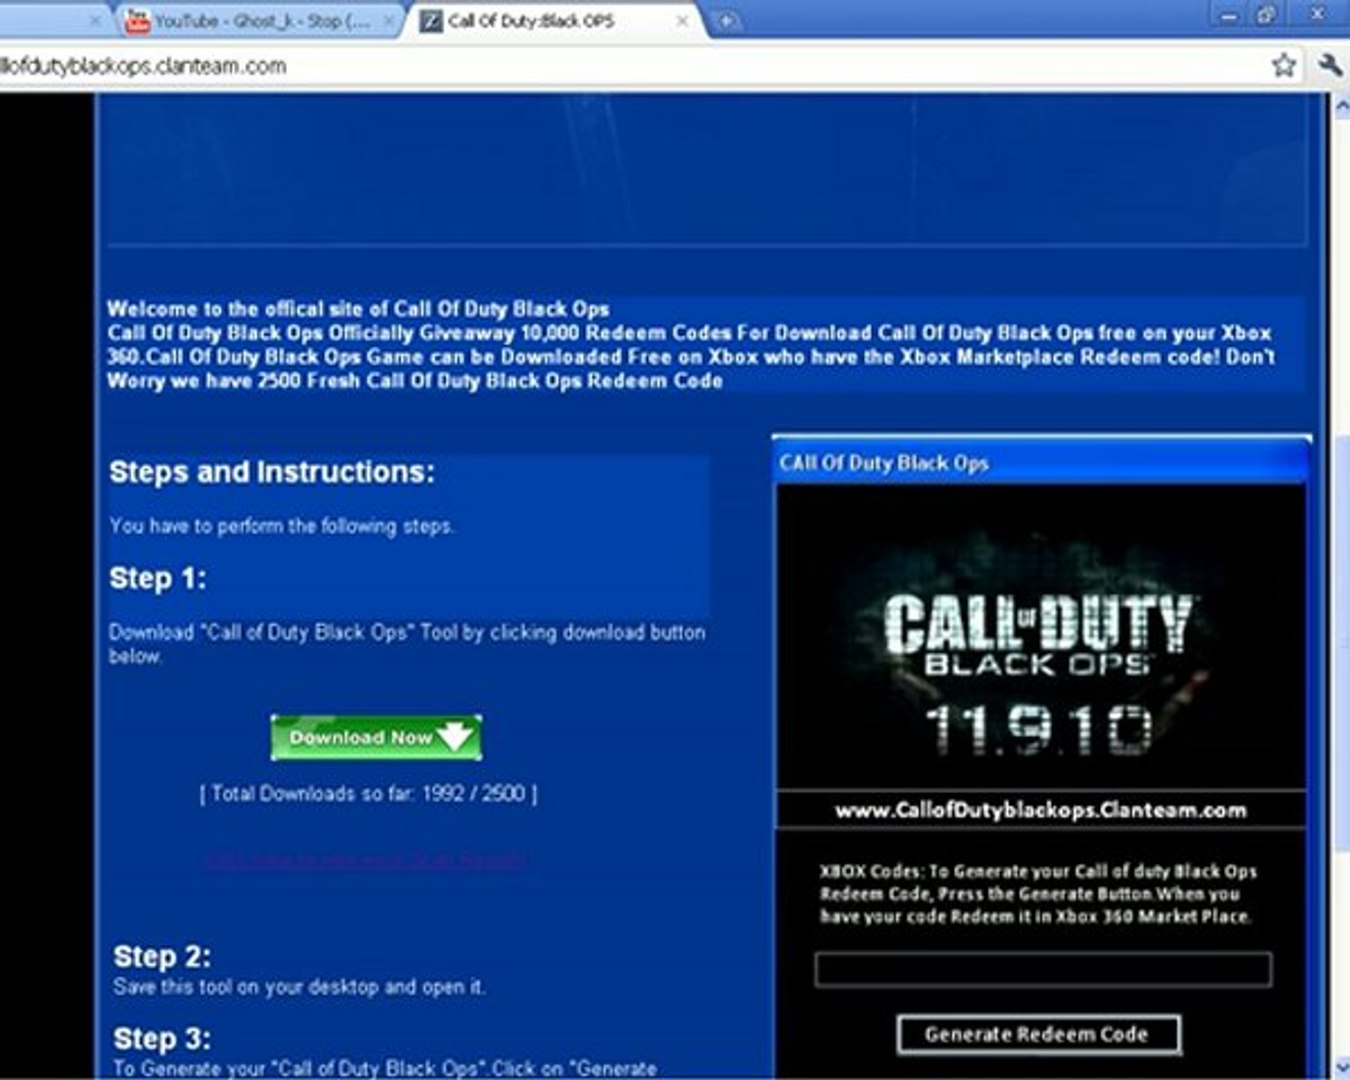 Verdorren pack Aan Call of Duty Black Ops Redemption Codes for Xbox 360 Free - video  Dailymotion